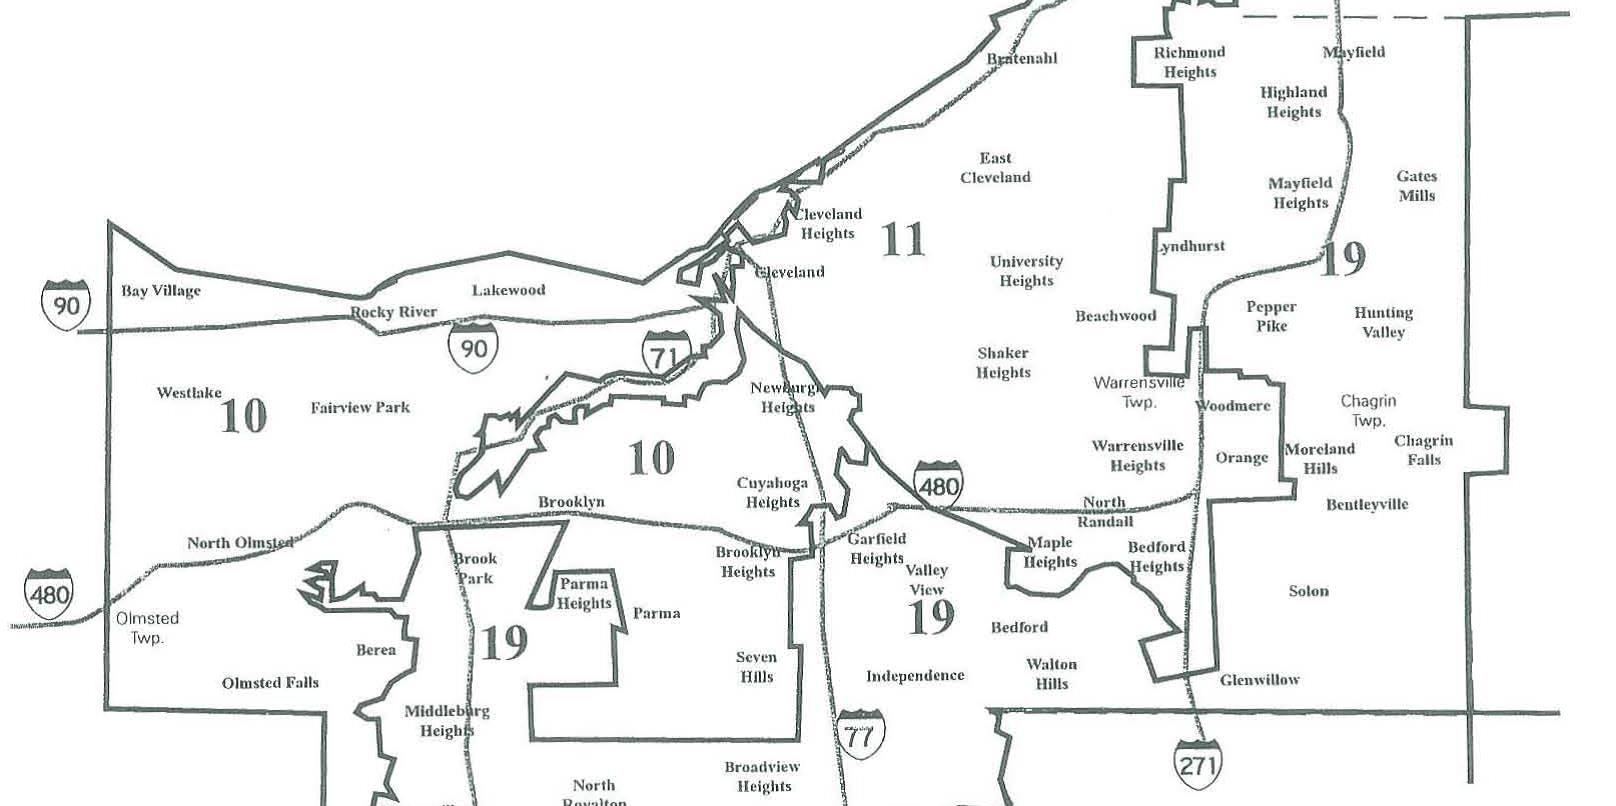 District 10 in 1992